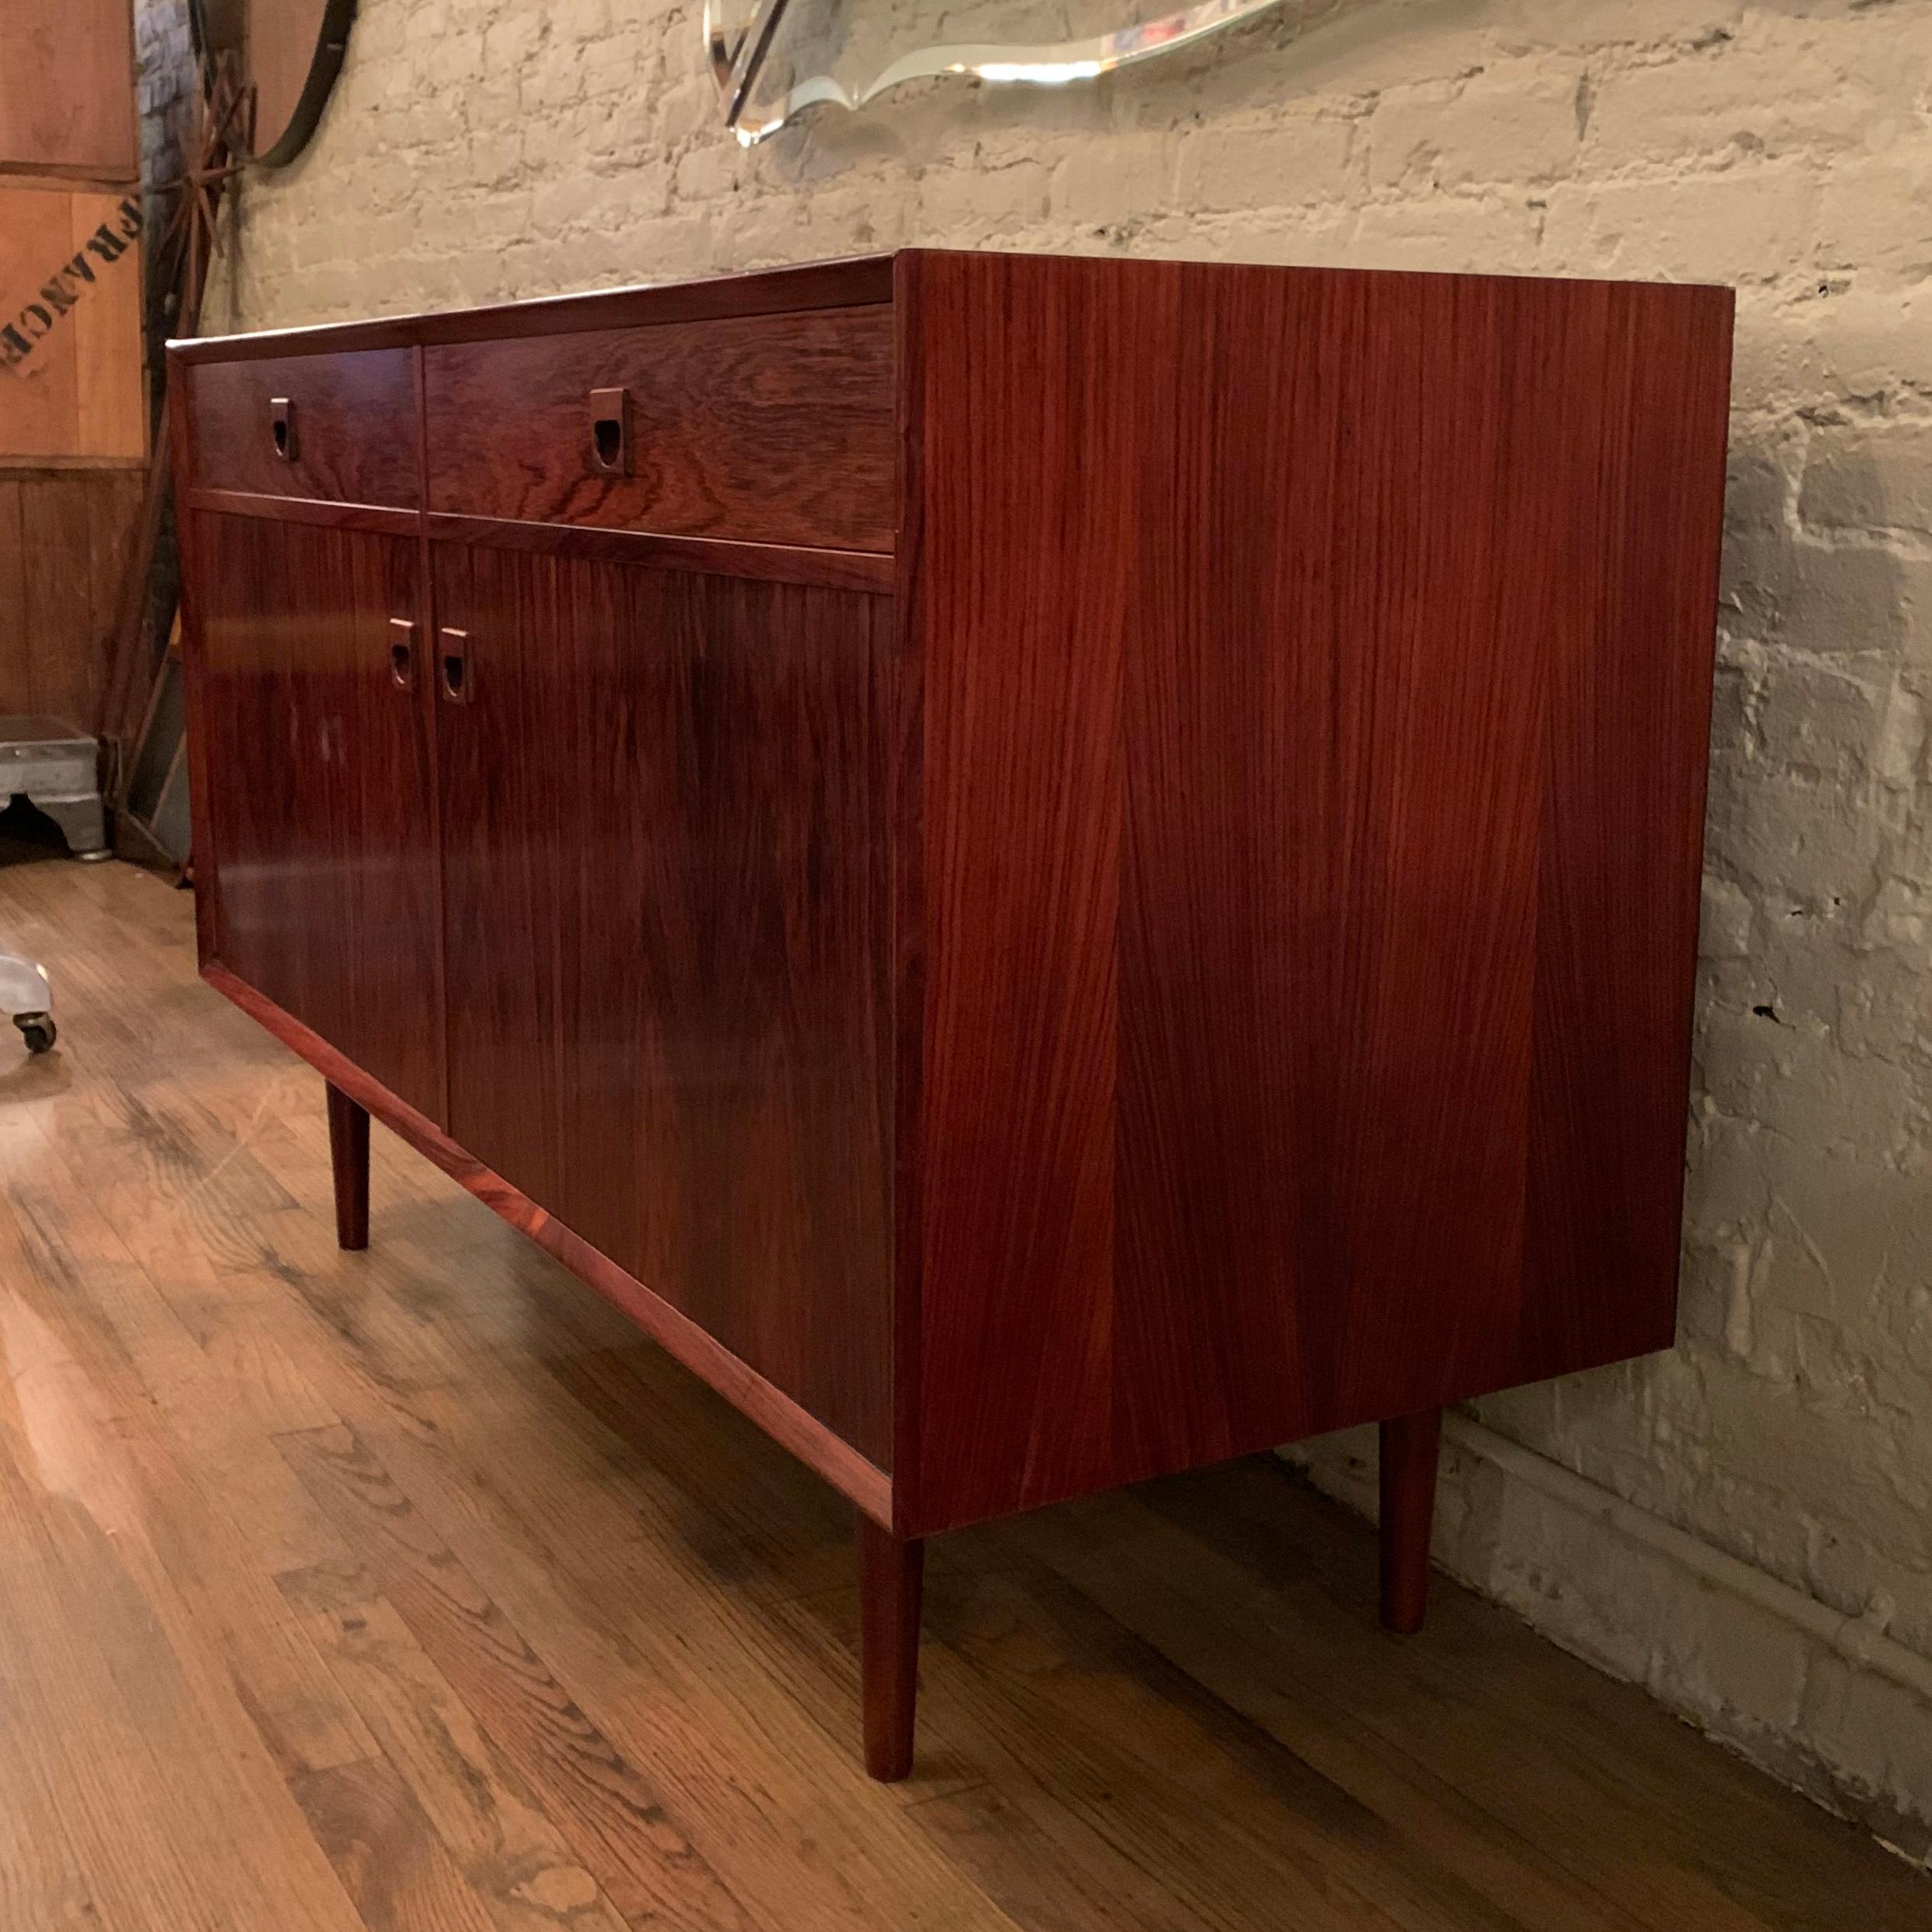 20th Century Danish Modern Rosewood Sideboard Credenza by E. Brouer for Brouer Møbelfabrik